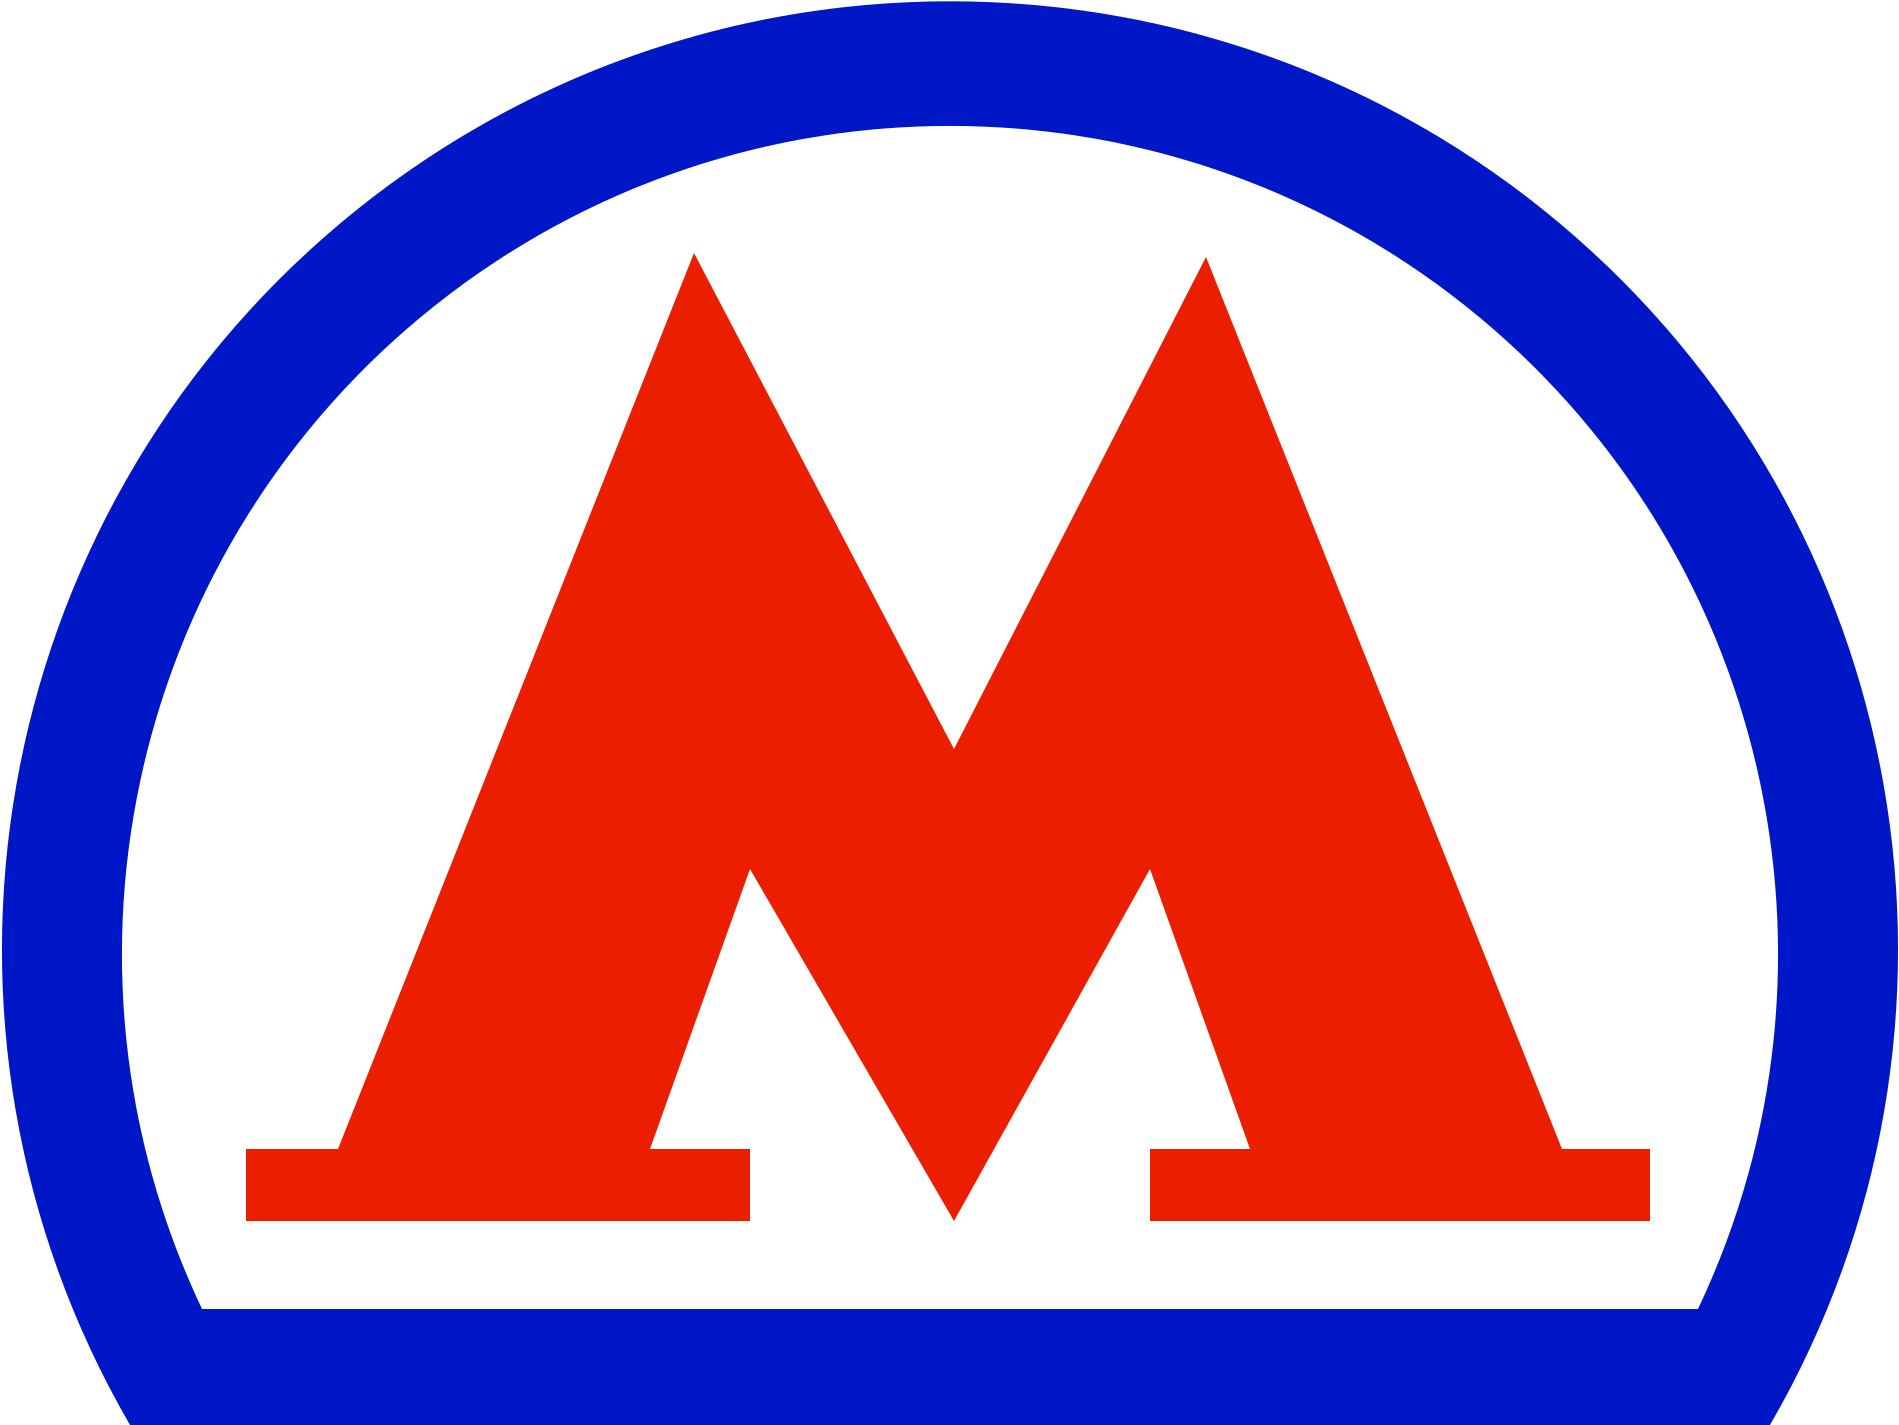 Image Result For Moscow Metro - Moscow Metro Png (2000x1568)